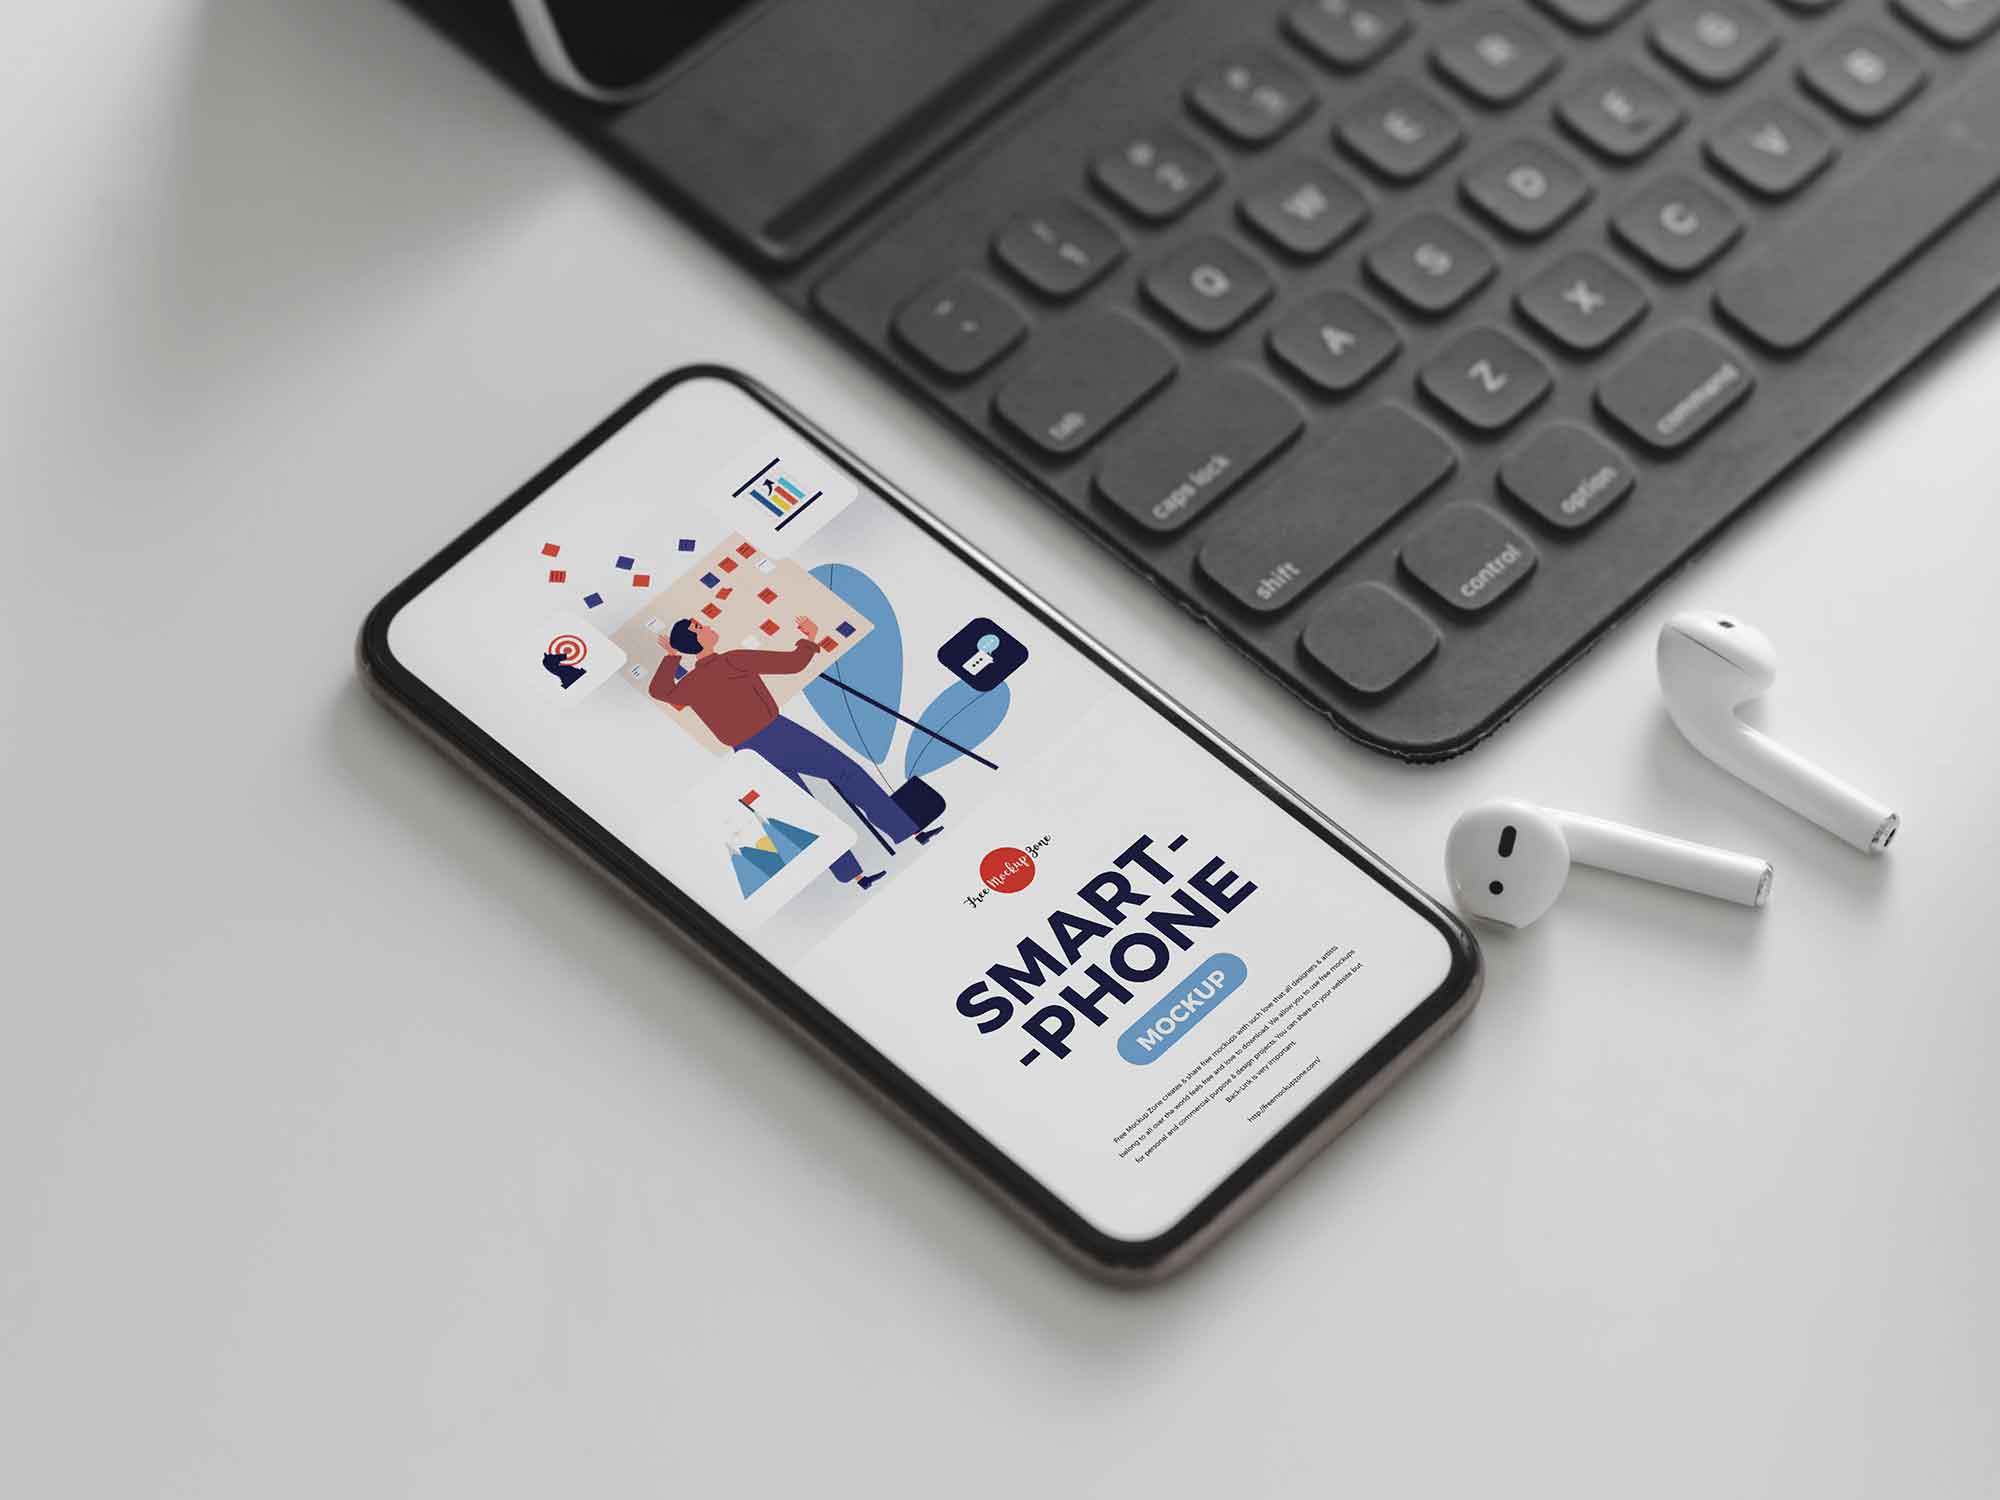 Phone And Keyboard And Airpods Psd Mockup Psd By Free Mockup Zone